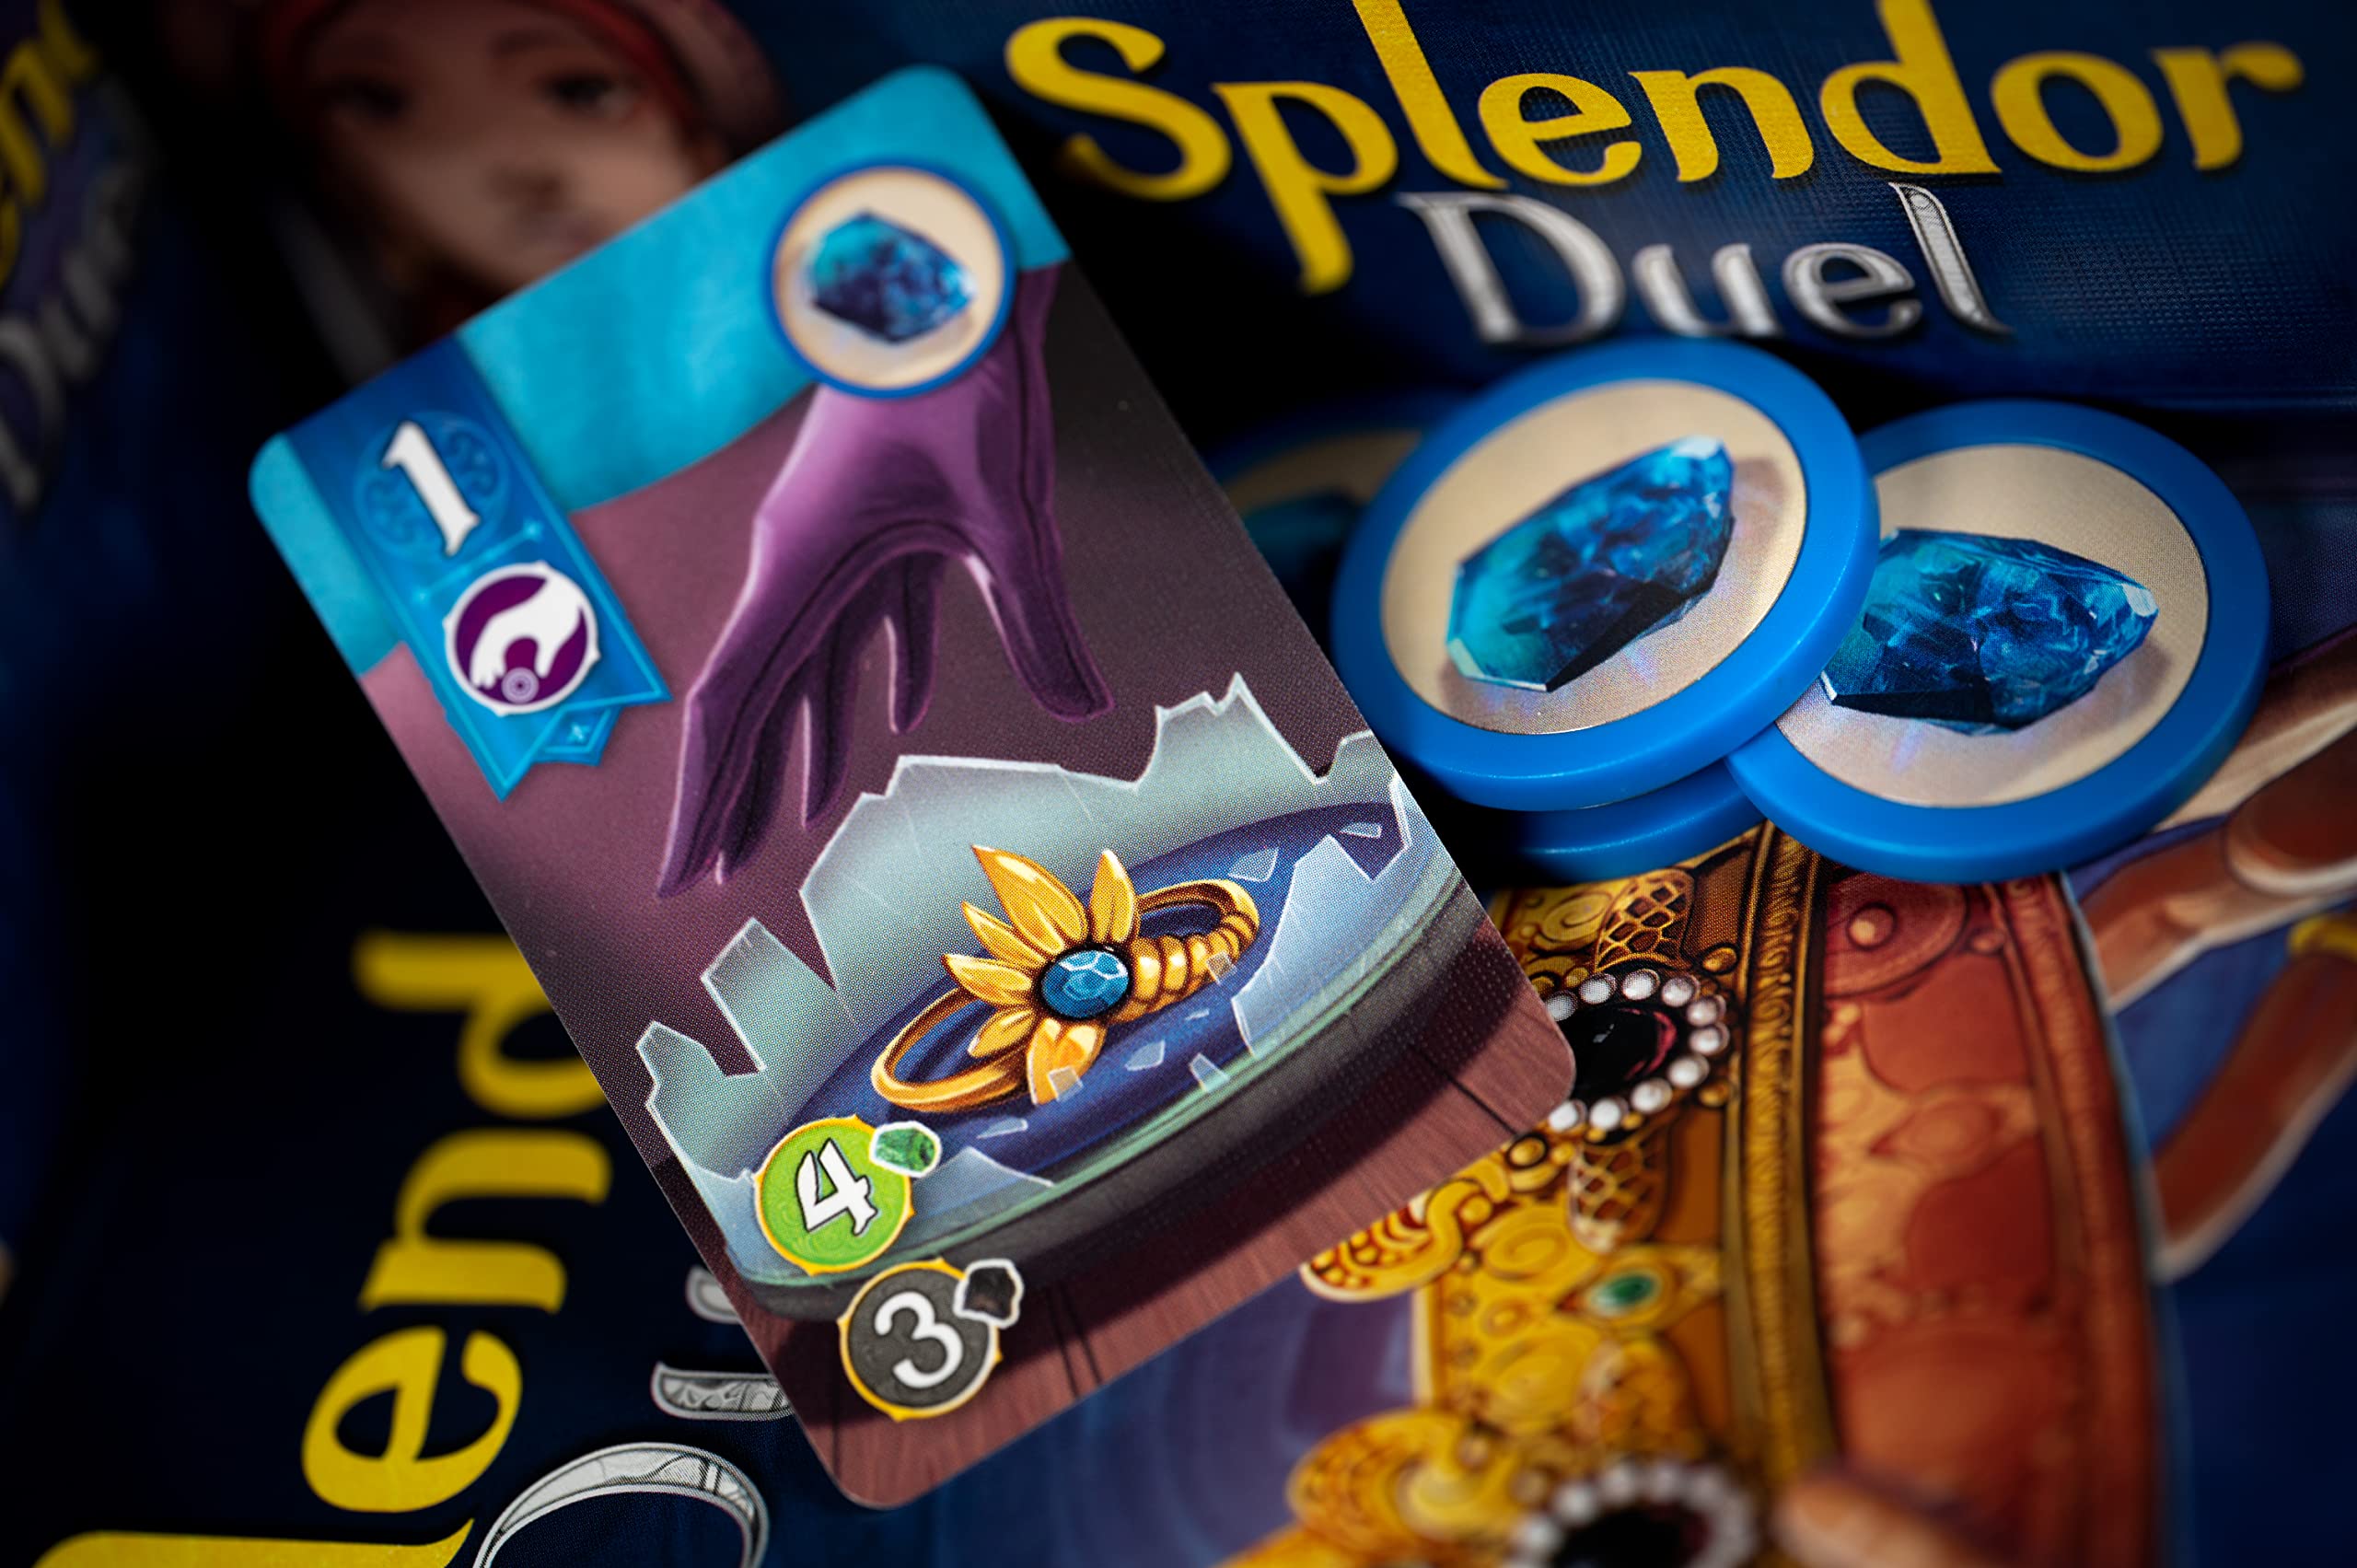 Splendor Duel Board Game - Strategy Game for Kids and Adults, Fun Family Game Night Entertainment, Ages 10+, 2 Players, 30-Minute Playtime, Made by Space Cowboys